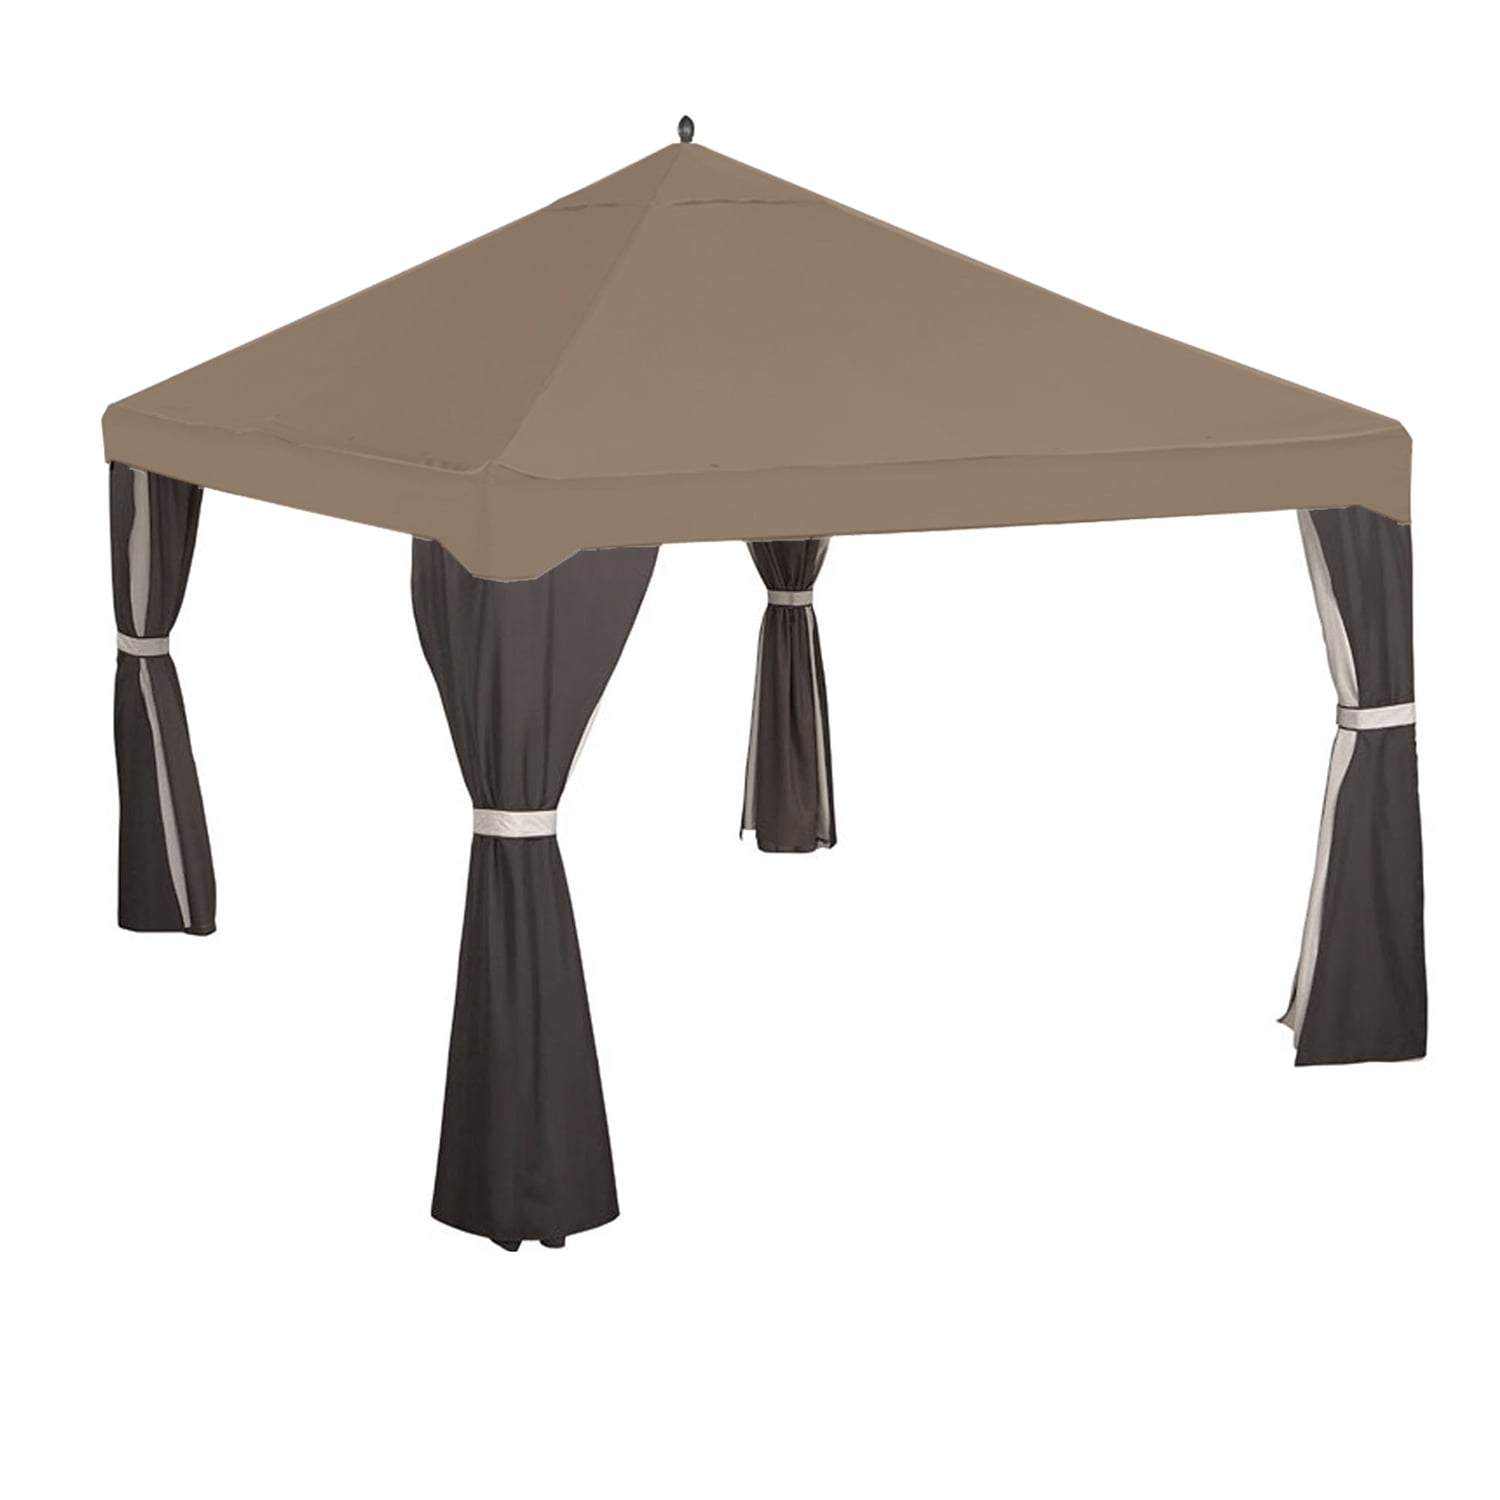 Garden Winds Replacement Canopy Top Cover for the Garden Treasure's 10